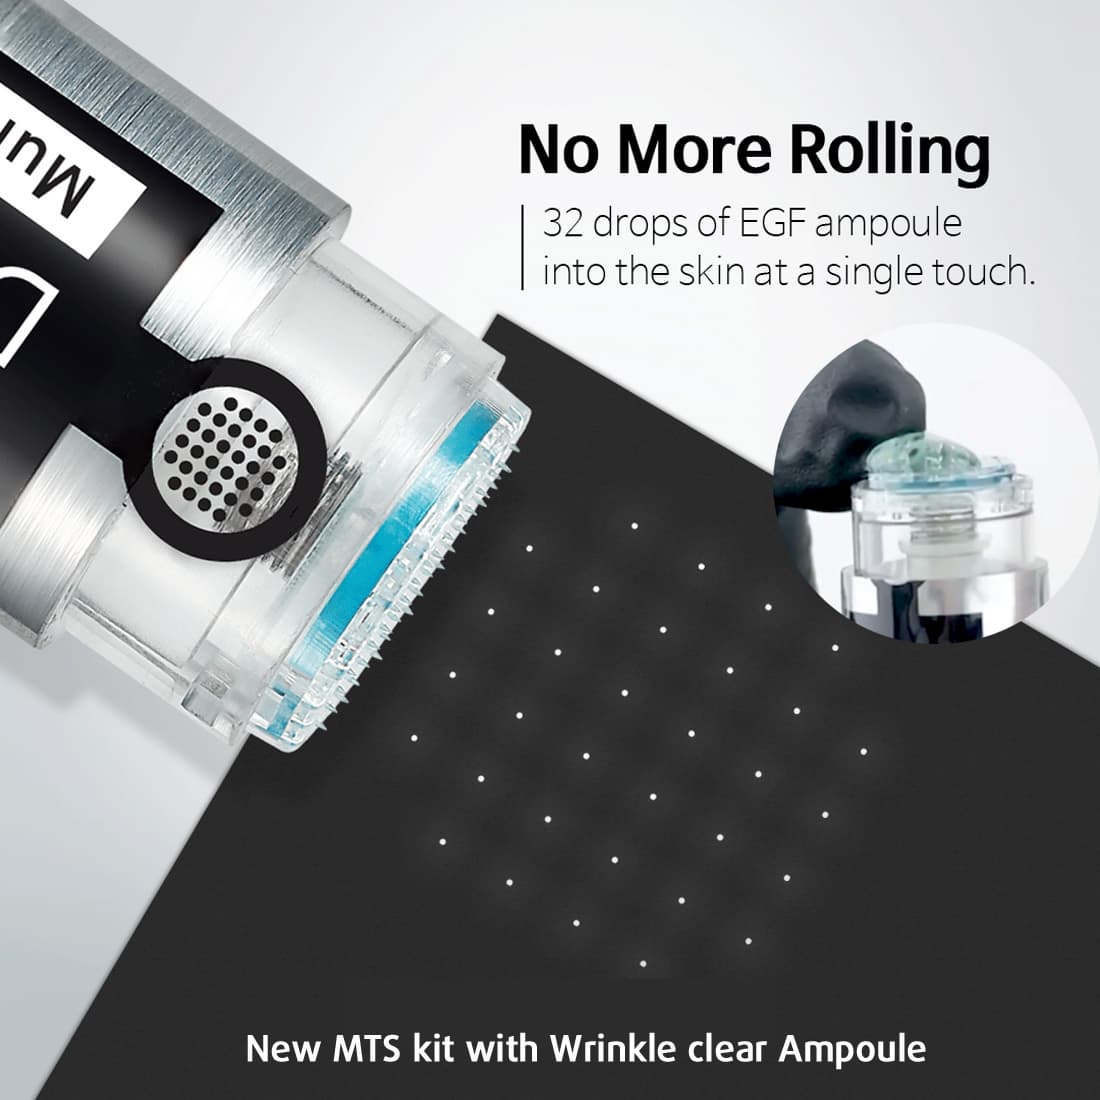 New Derma MTS Kit with Wrinkle Clear Ampoule Inside